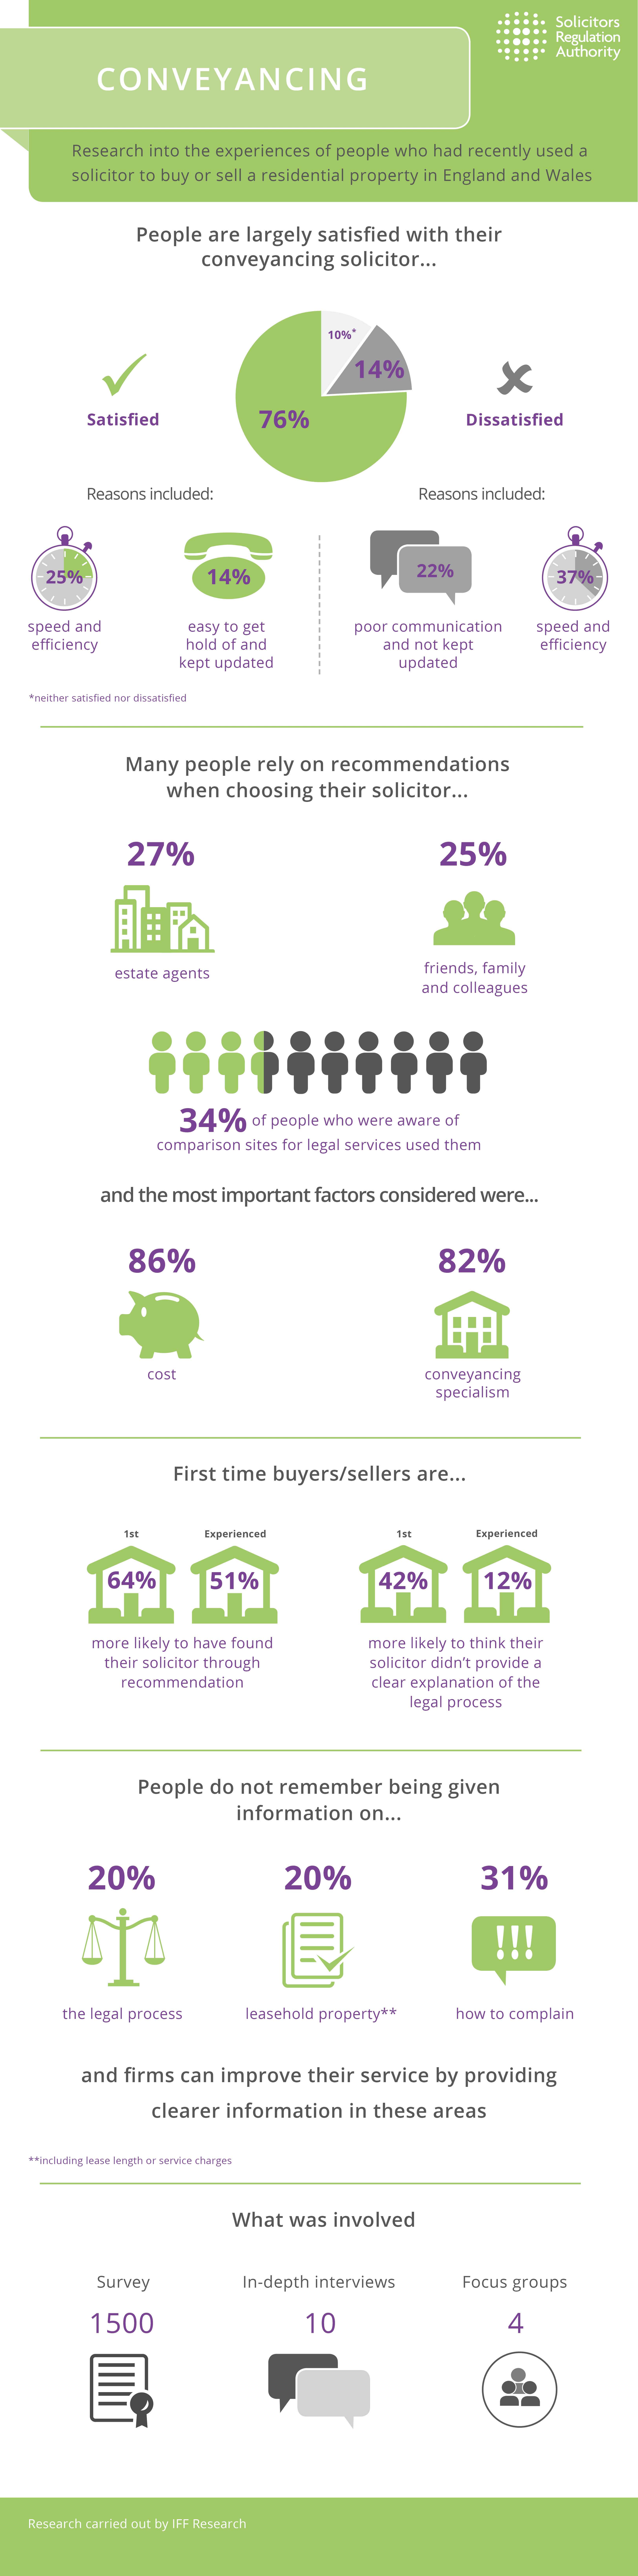 Infographic: conveyancing